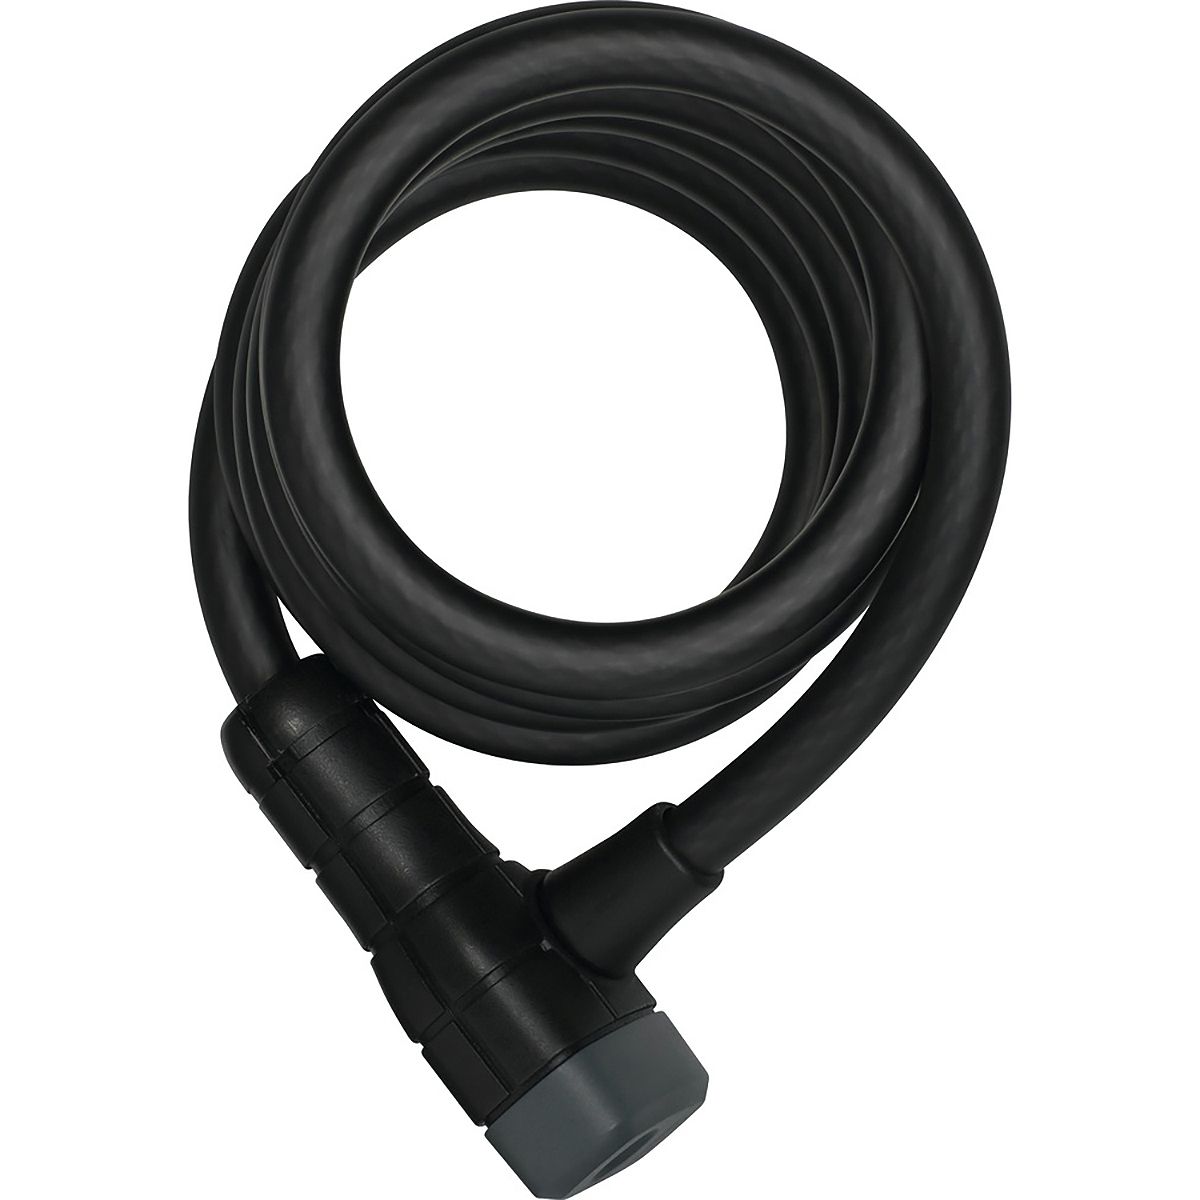 Abus Booster 6512K Key Cable Lock Black, 180cm